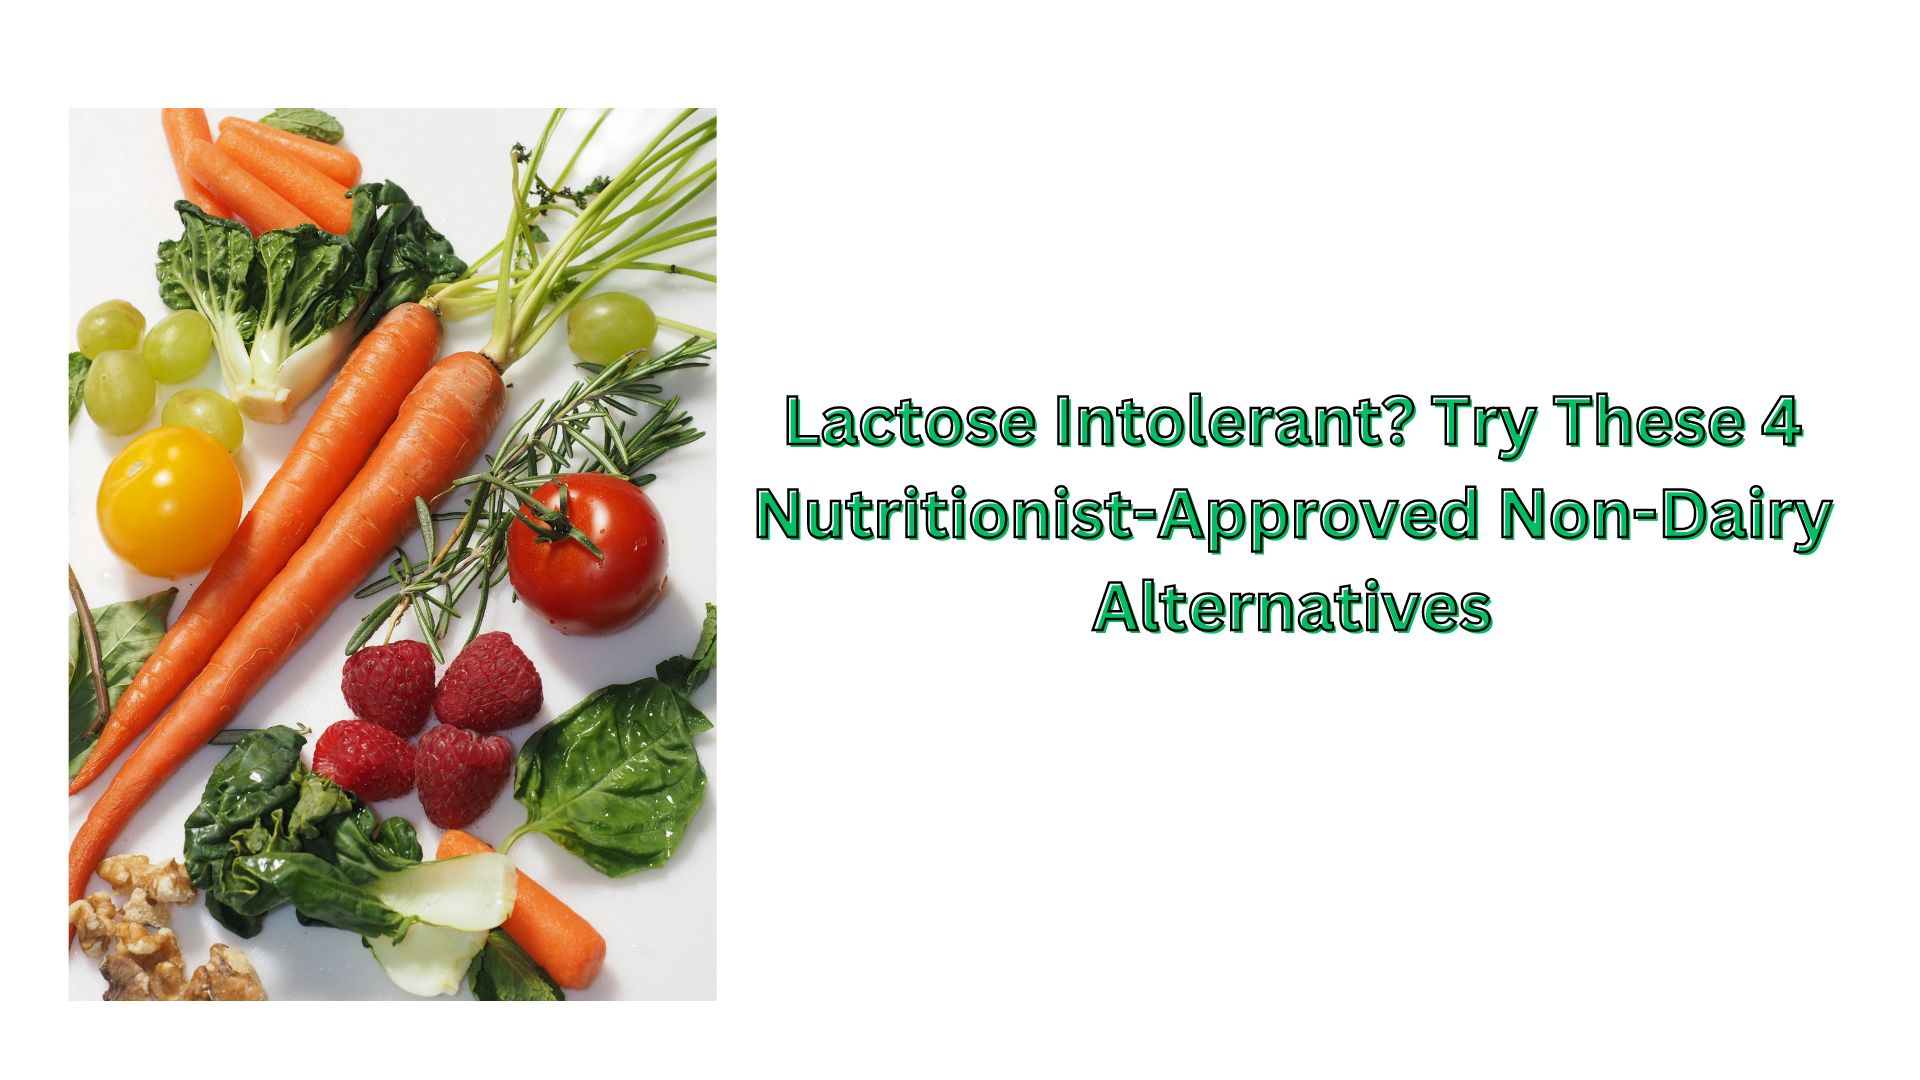 Lactose Intolerant? Try These 4 Nutritionist-Approved Non-Dairy Alternatives